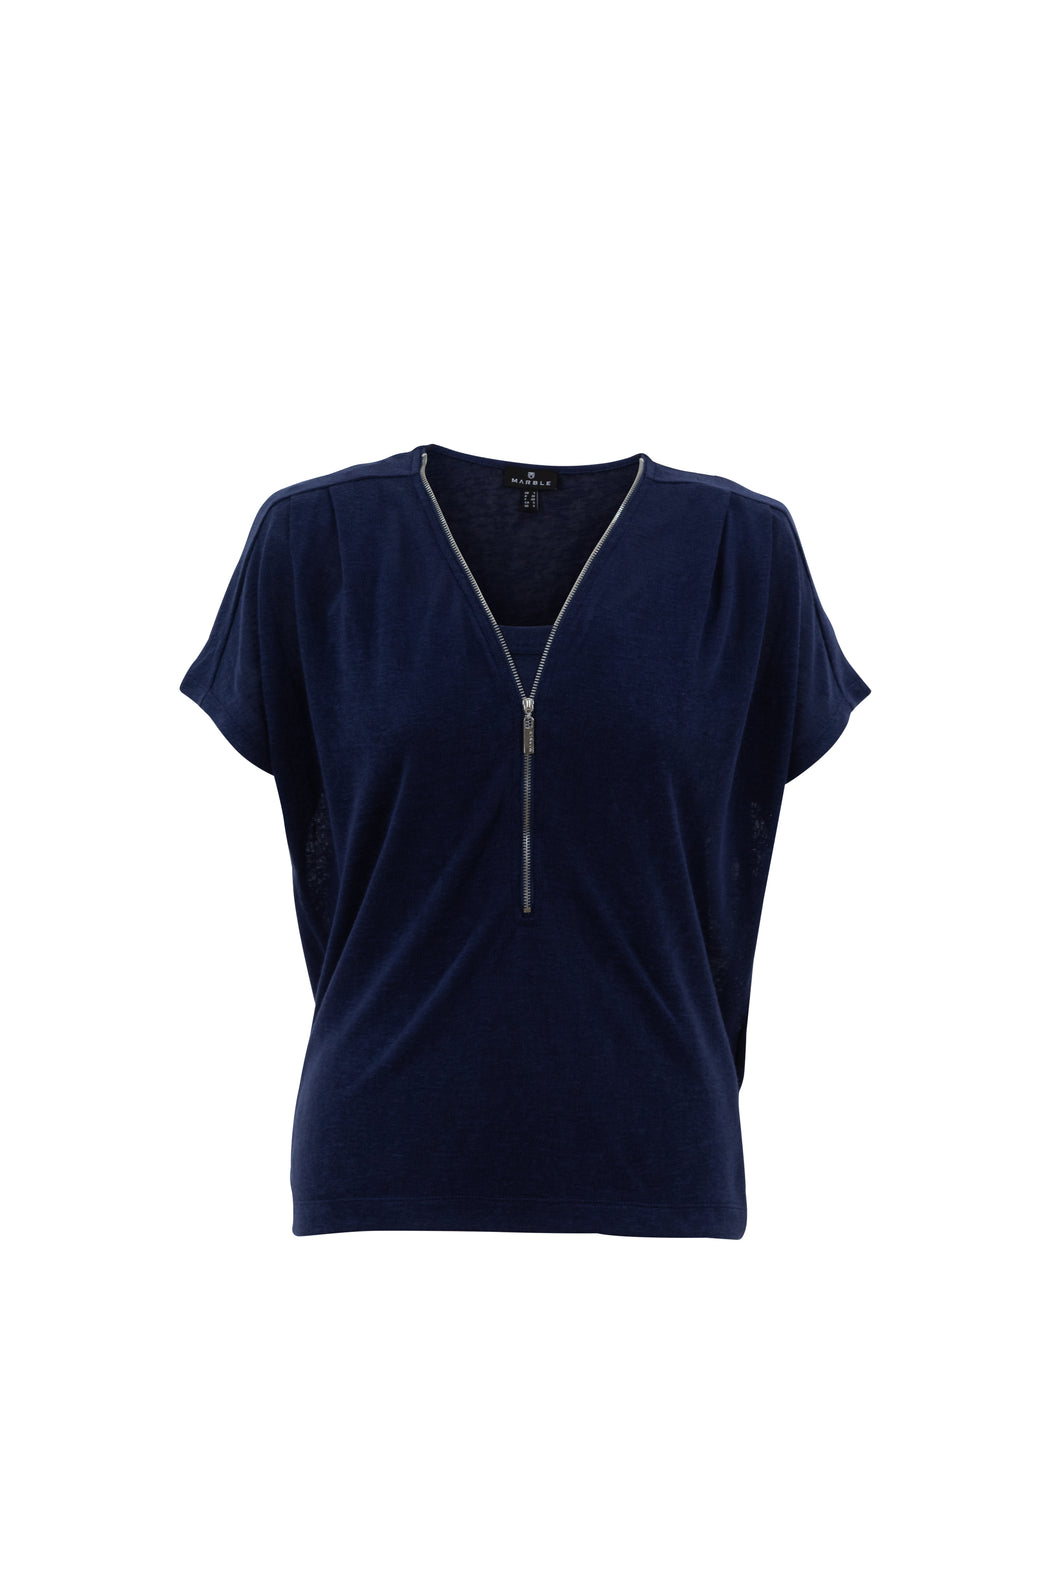 MARBLE 7378 V NECK TOP COL 103 NAVY